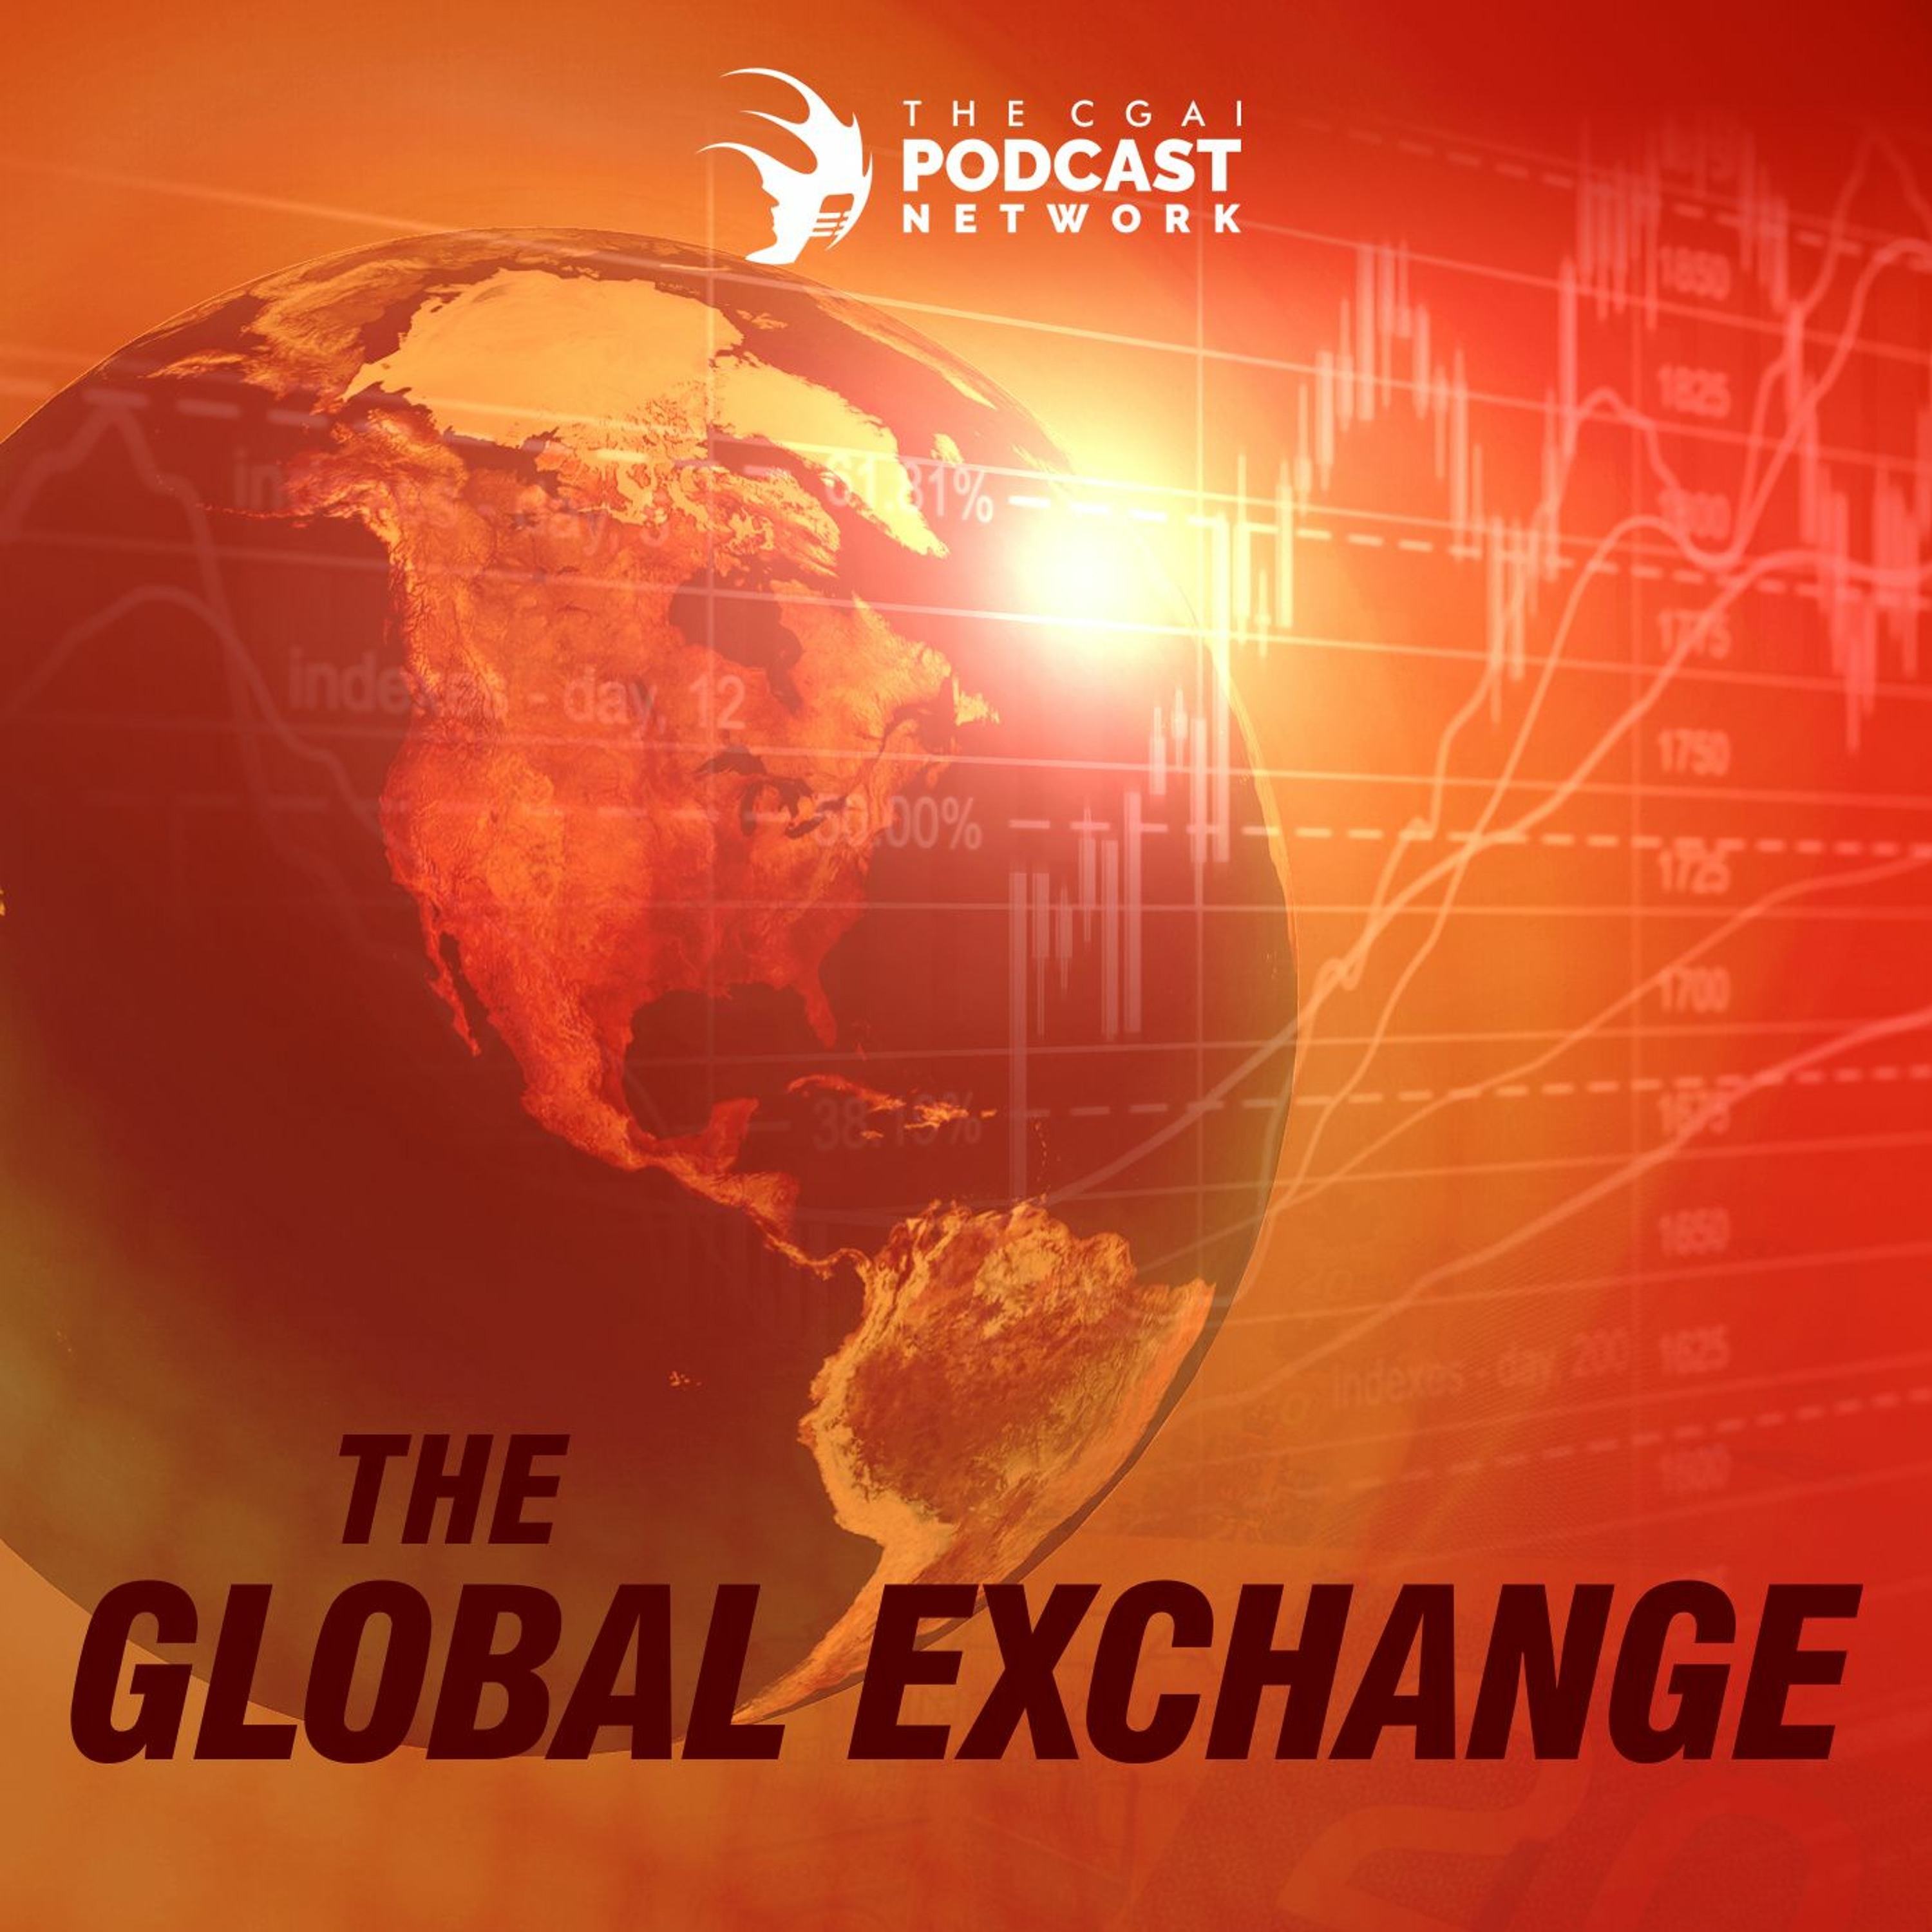 The Global Exchange: Deputy Minister Rob Stewart on Canada's Position in Global Trade